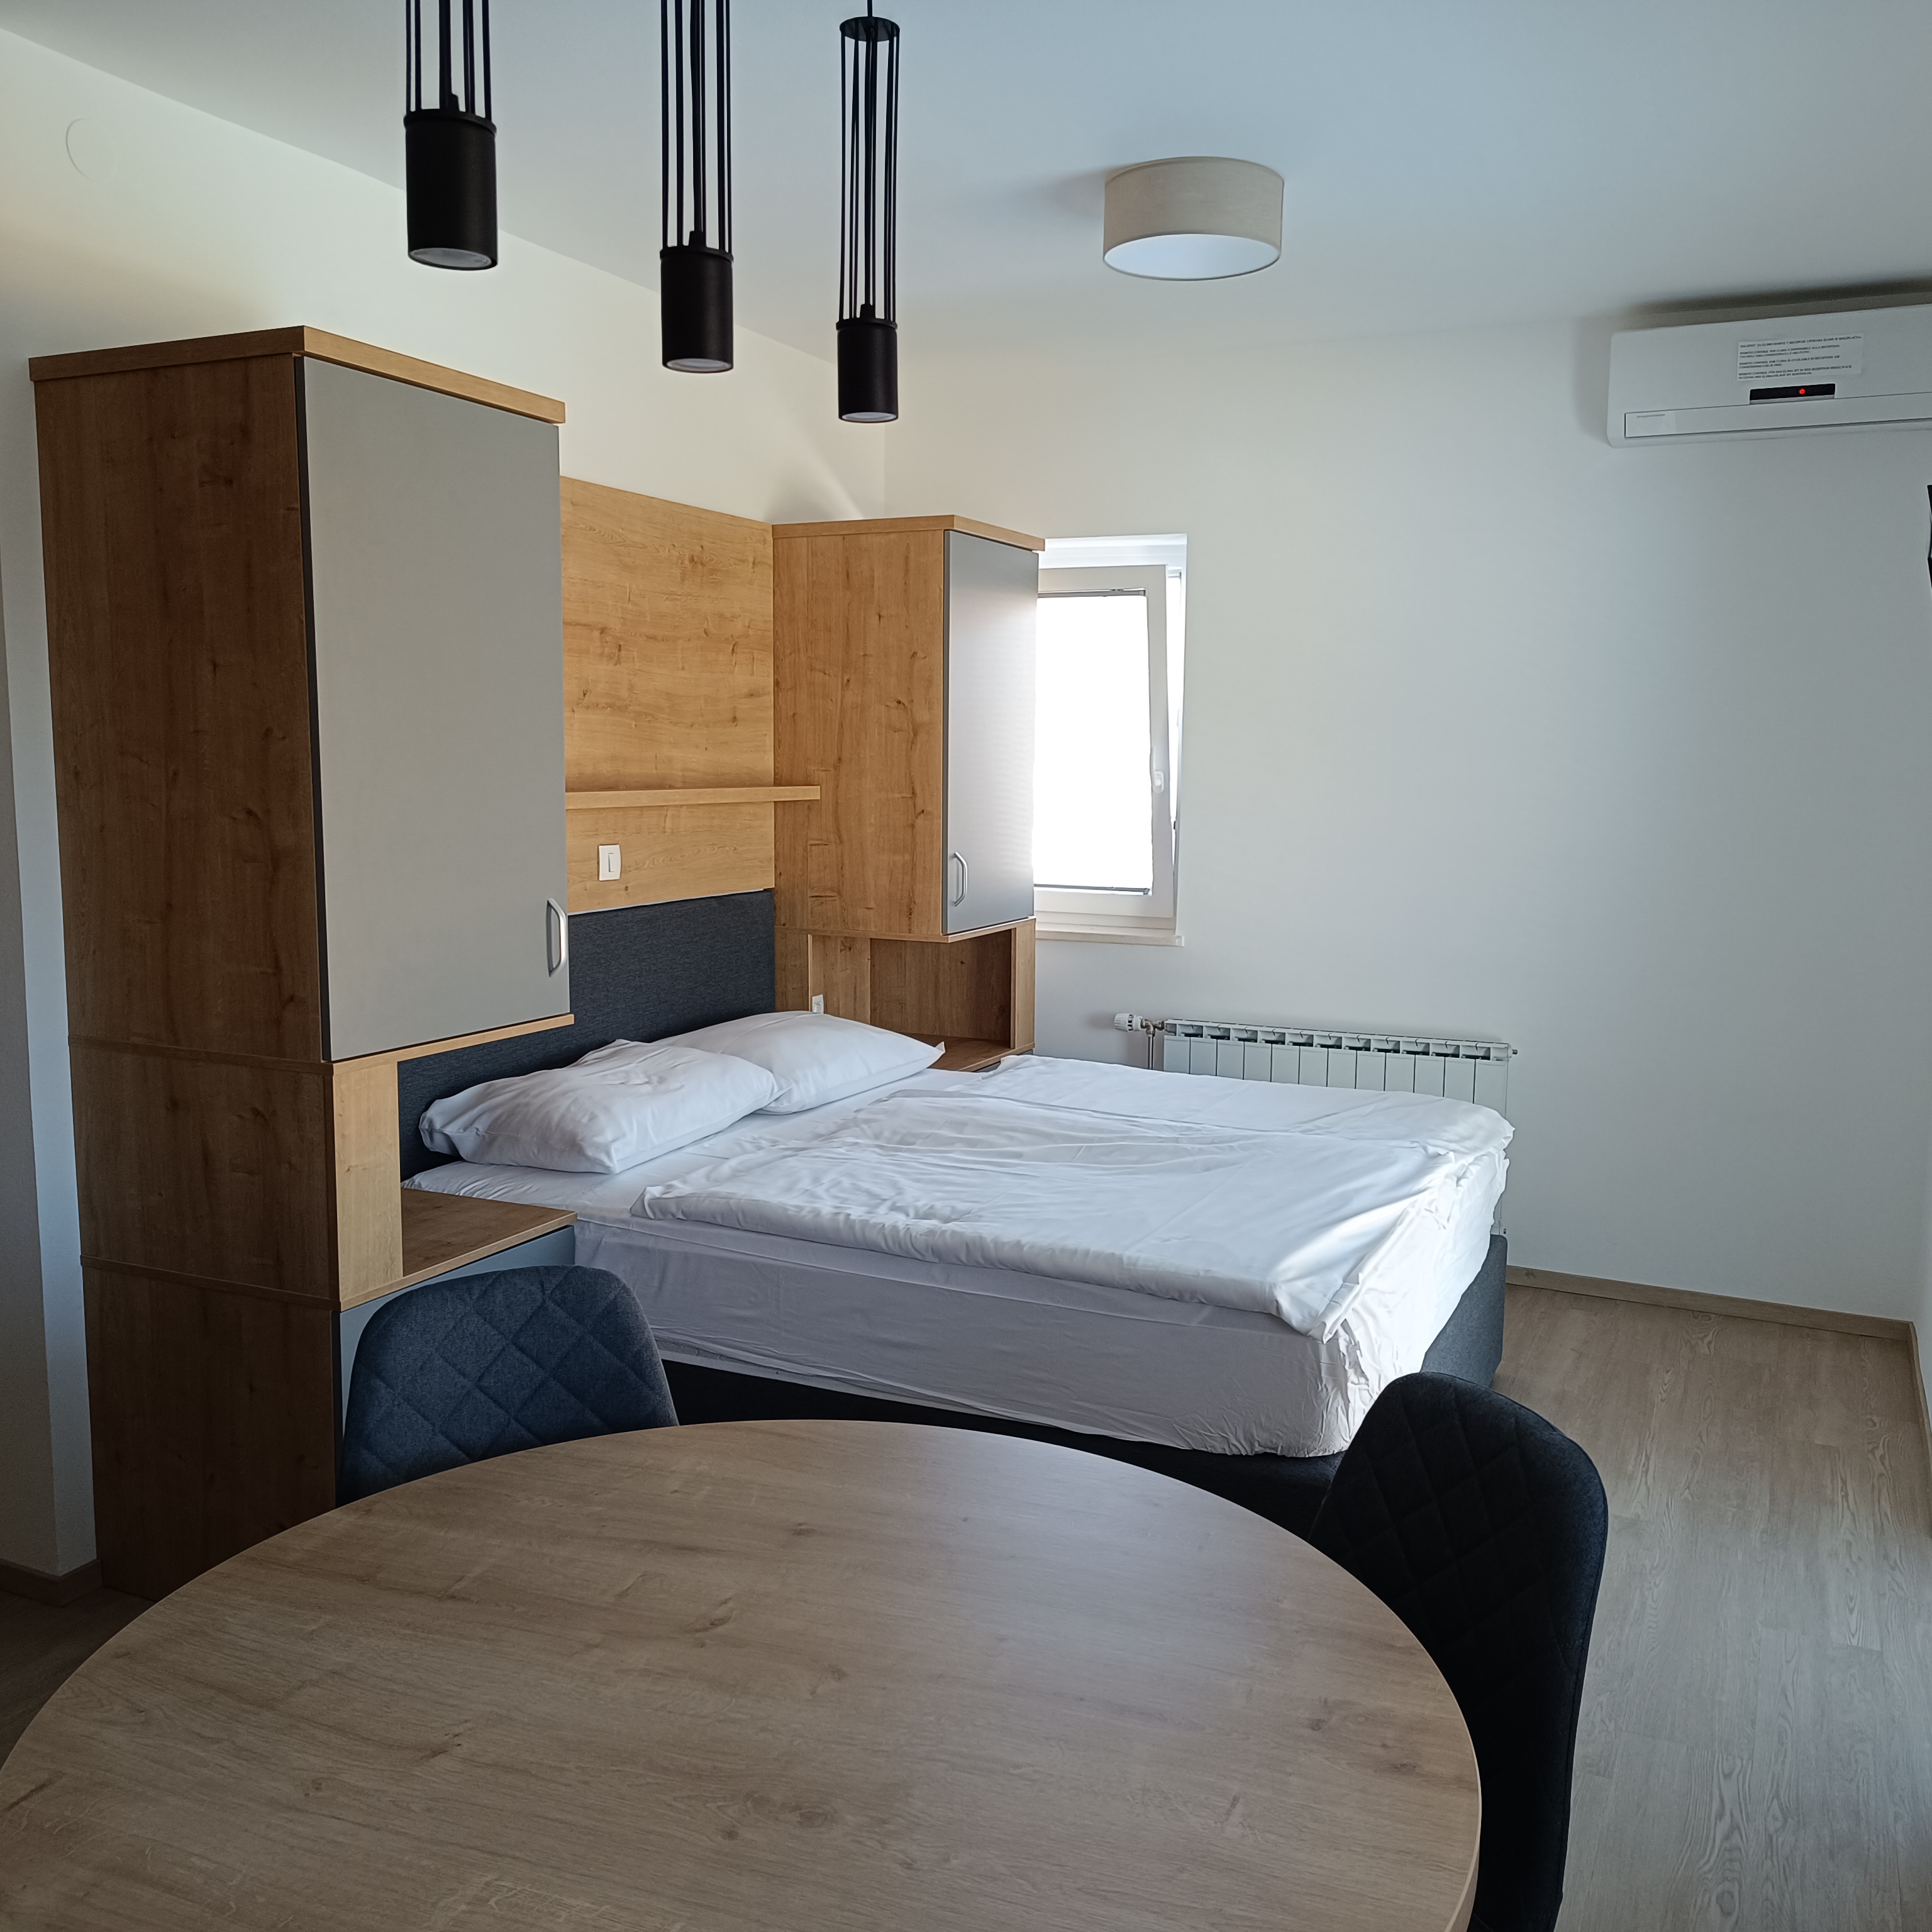 Room with kitchen 15